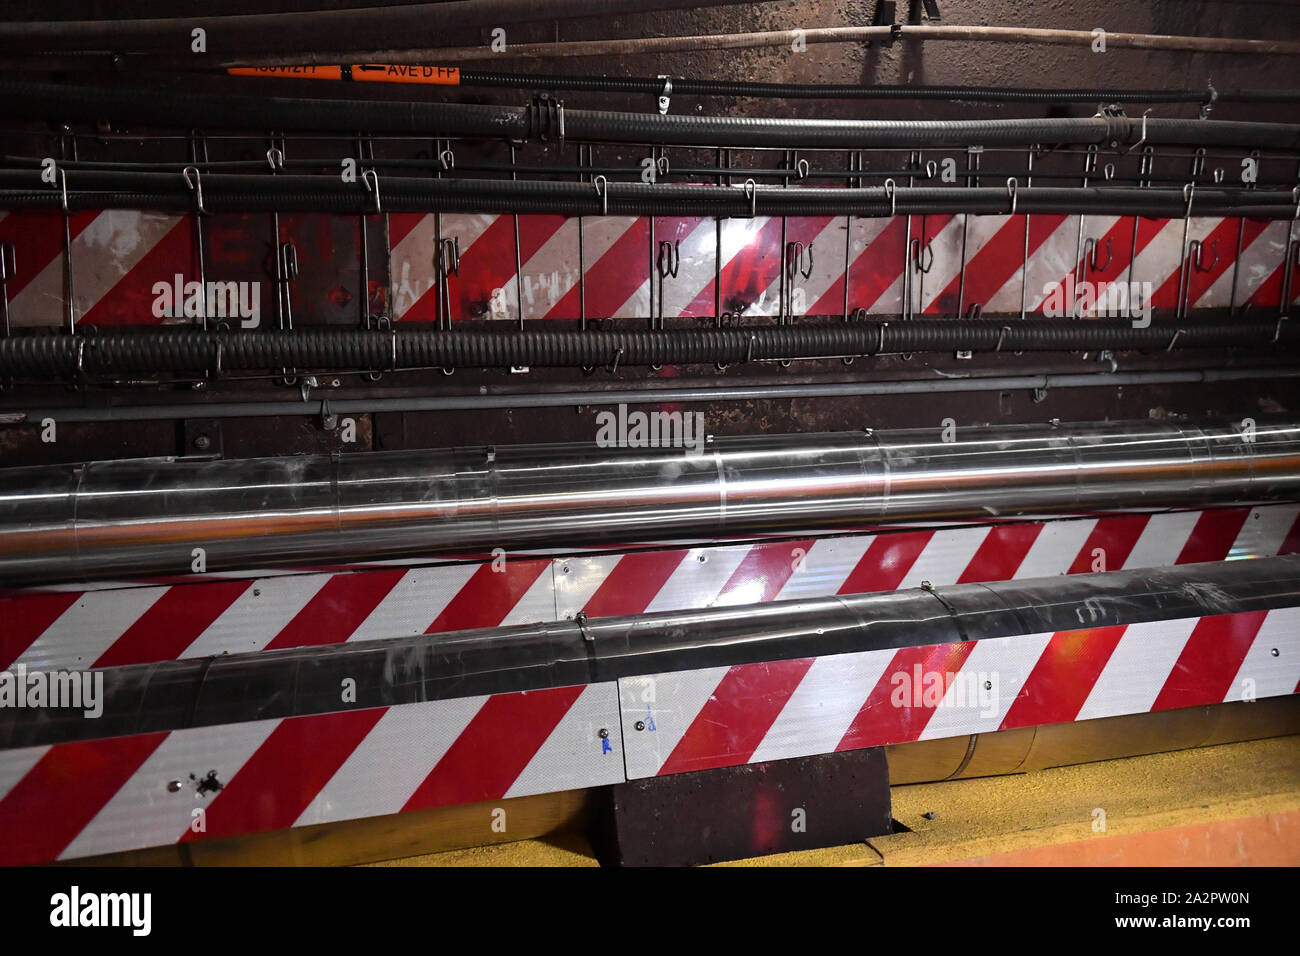 Governor Andrew Cuomo visit to the L Project tunnel rehabilitation, New York, USA - 29 Sep 2019 - New cable racking system and new fire-resistant cabl Stock Photo